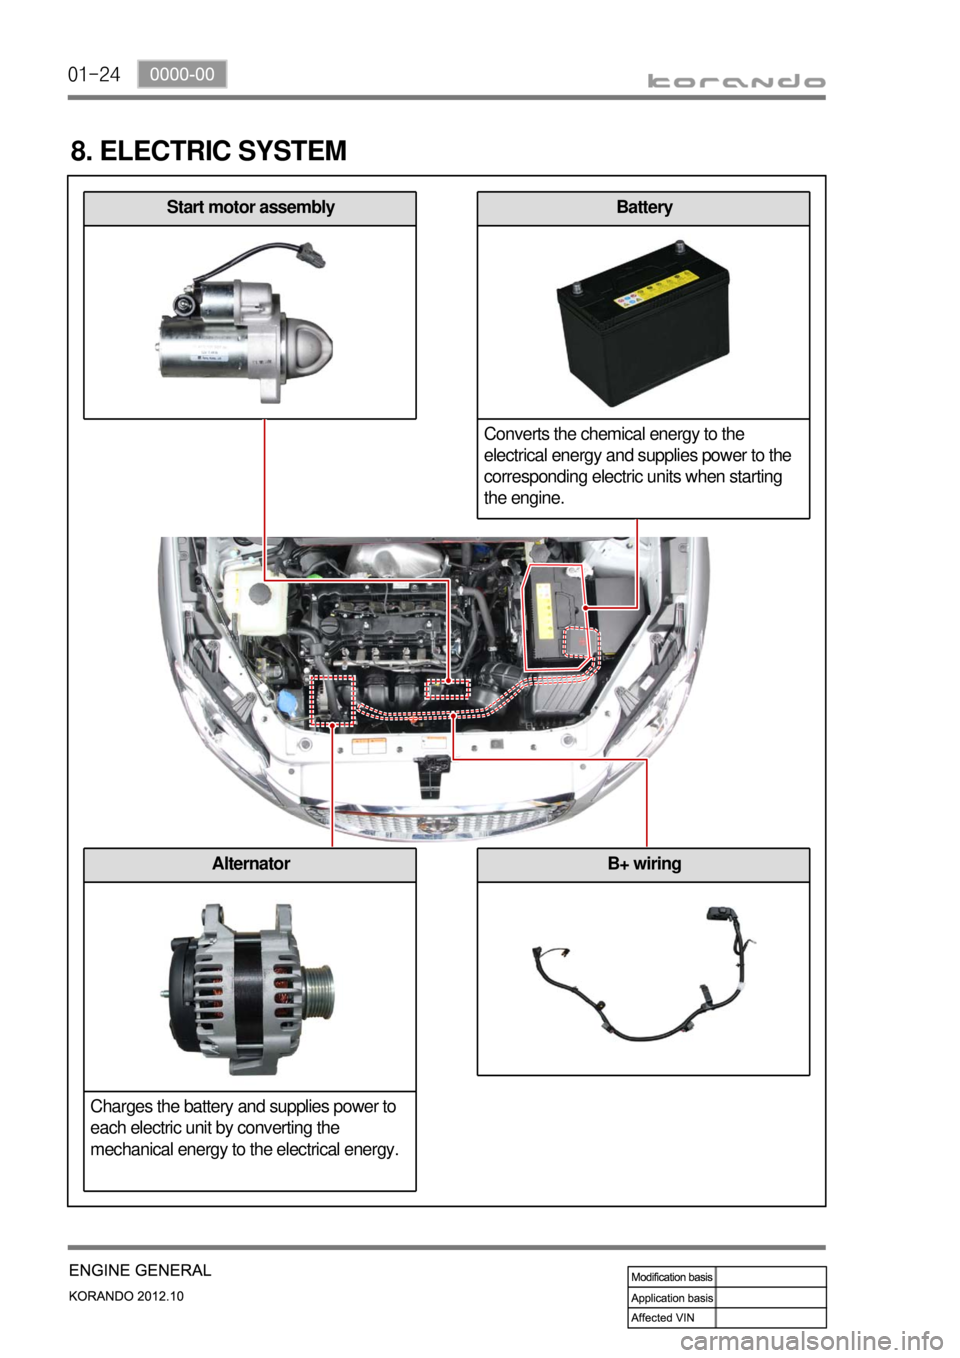 SSANGYONG KORANDO 2012  Service Manual 01-24
8. ELECTRIC SYSTEM
Start motor assemblyBattery
Converts the chemical energy to the 
electrical energy and supplies power to the 
corresponding electric units when starting 
the engine.
B+ wiring